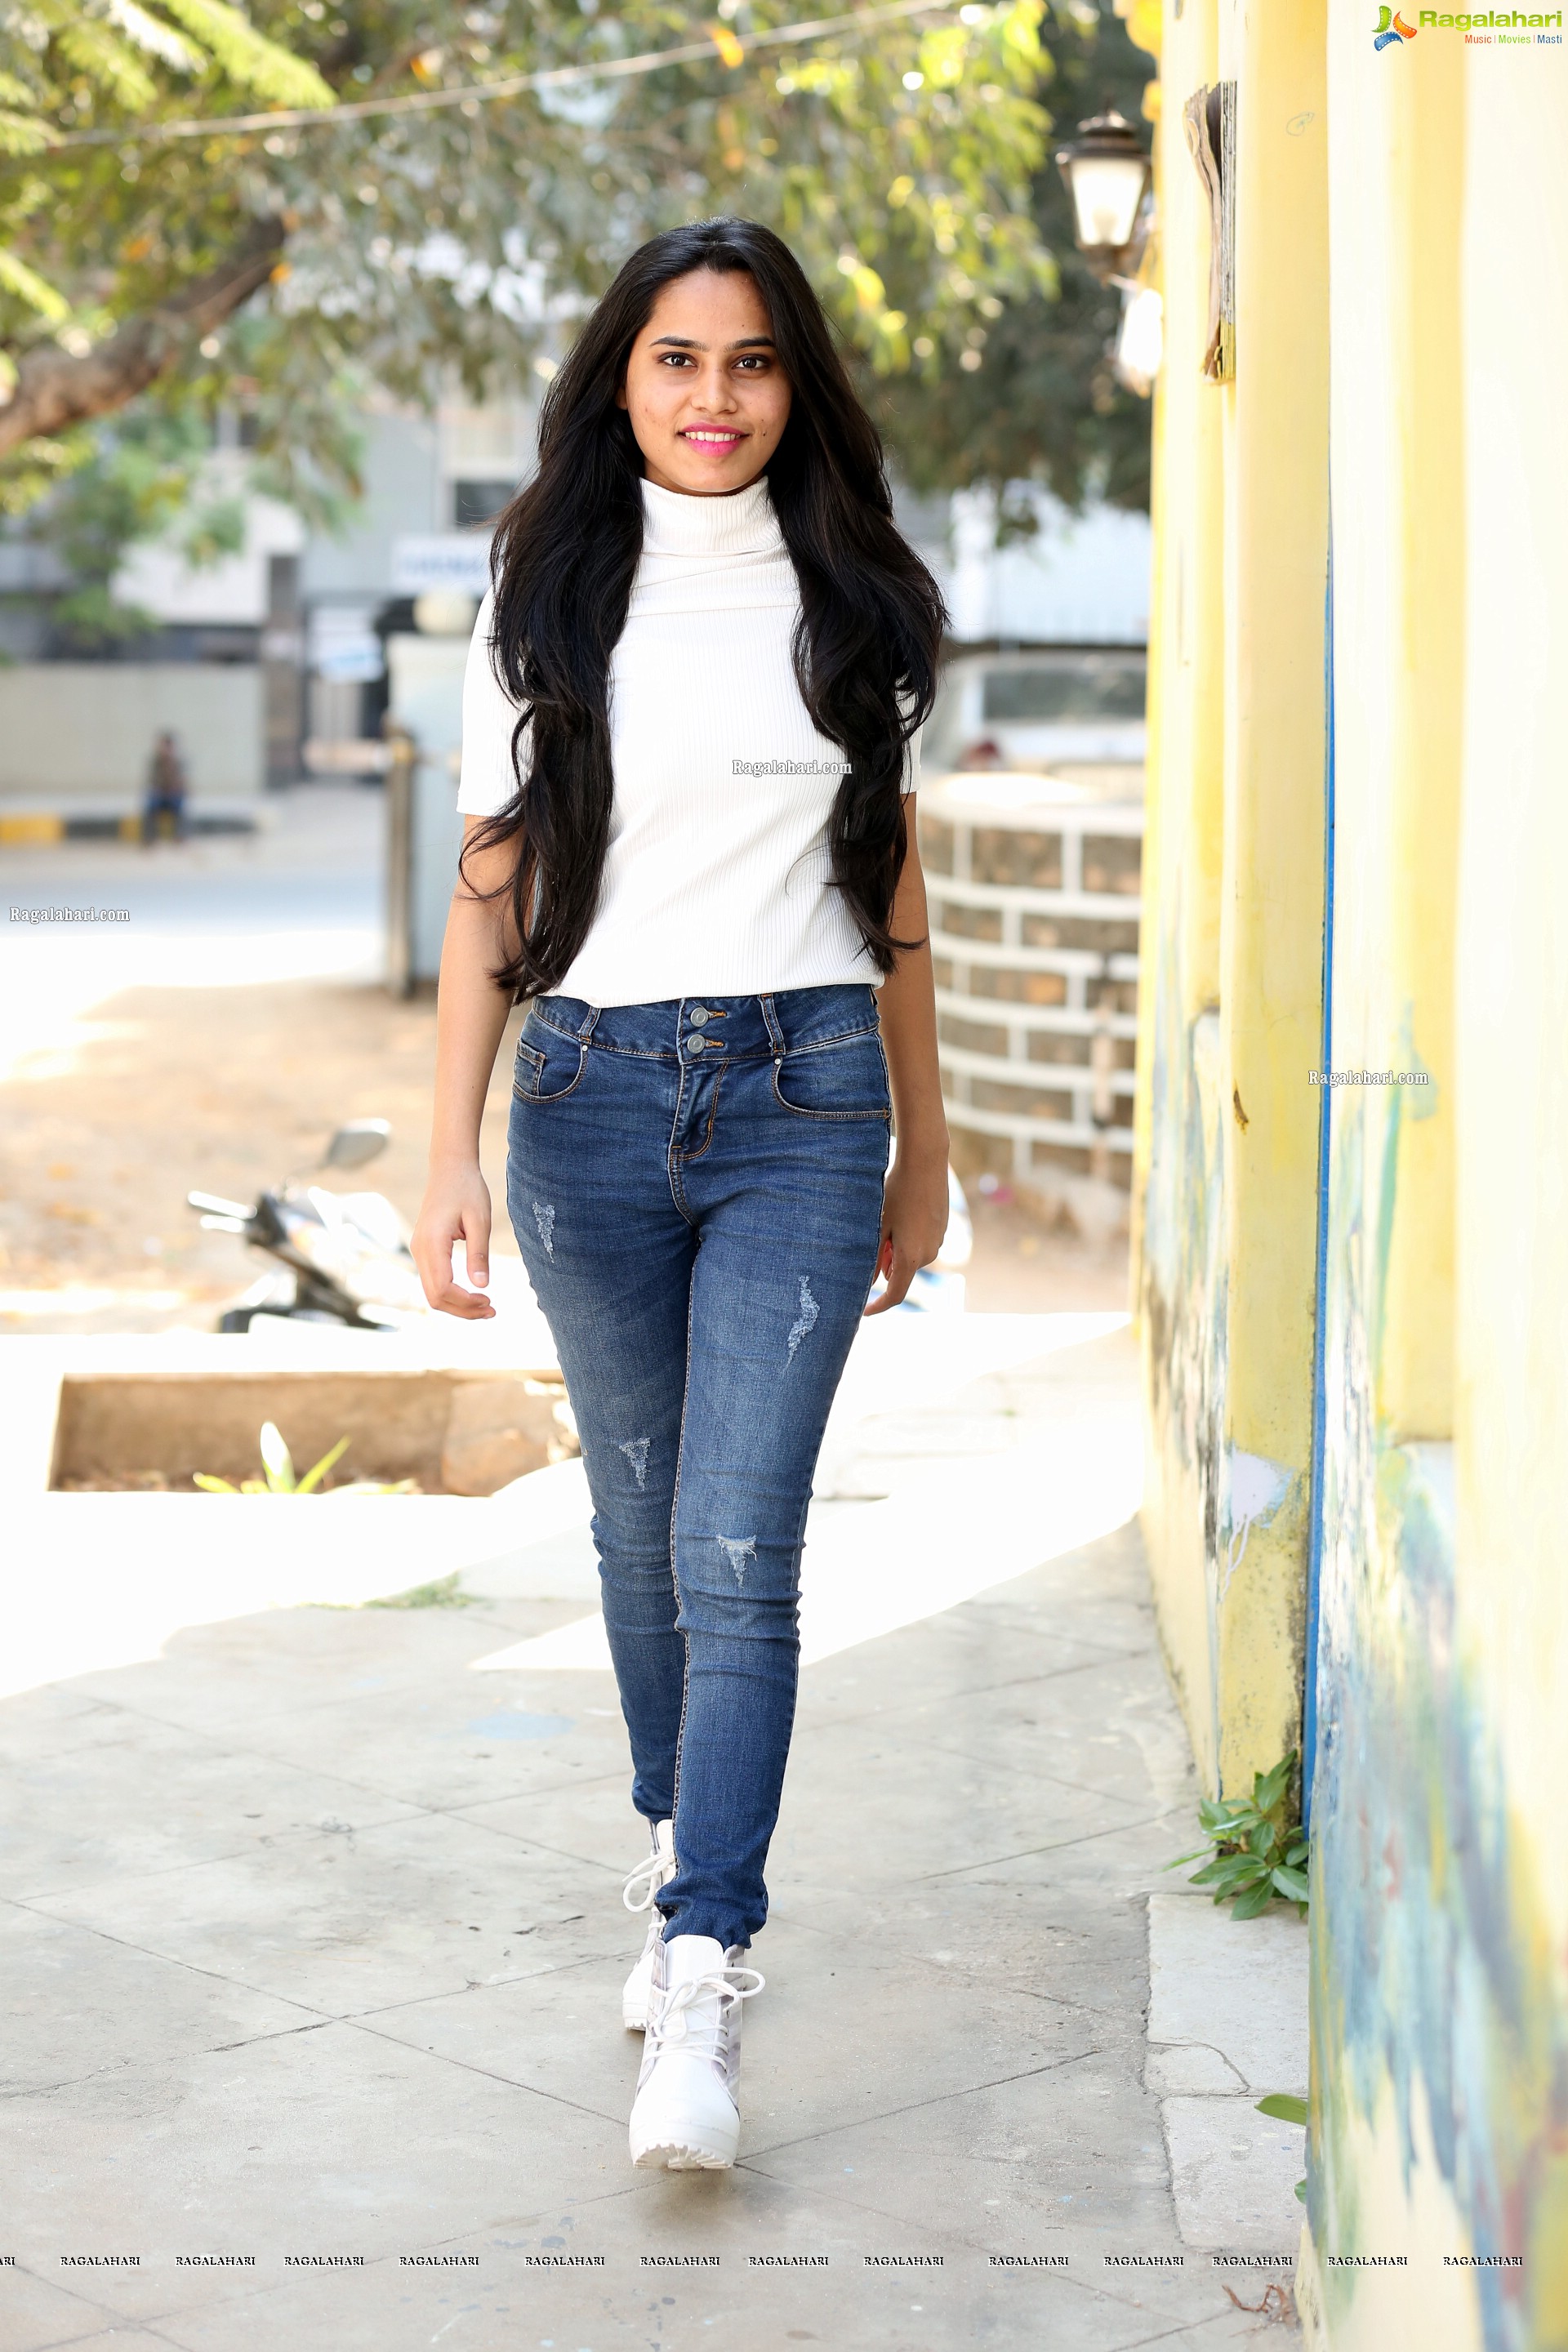 Ramya Rajput in Trendy Denim Jacket Over White Turtleneck Top with Jeans, HD Photo Gallery